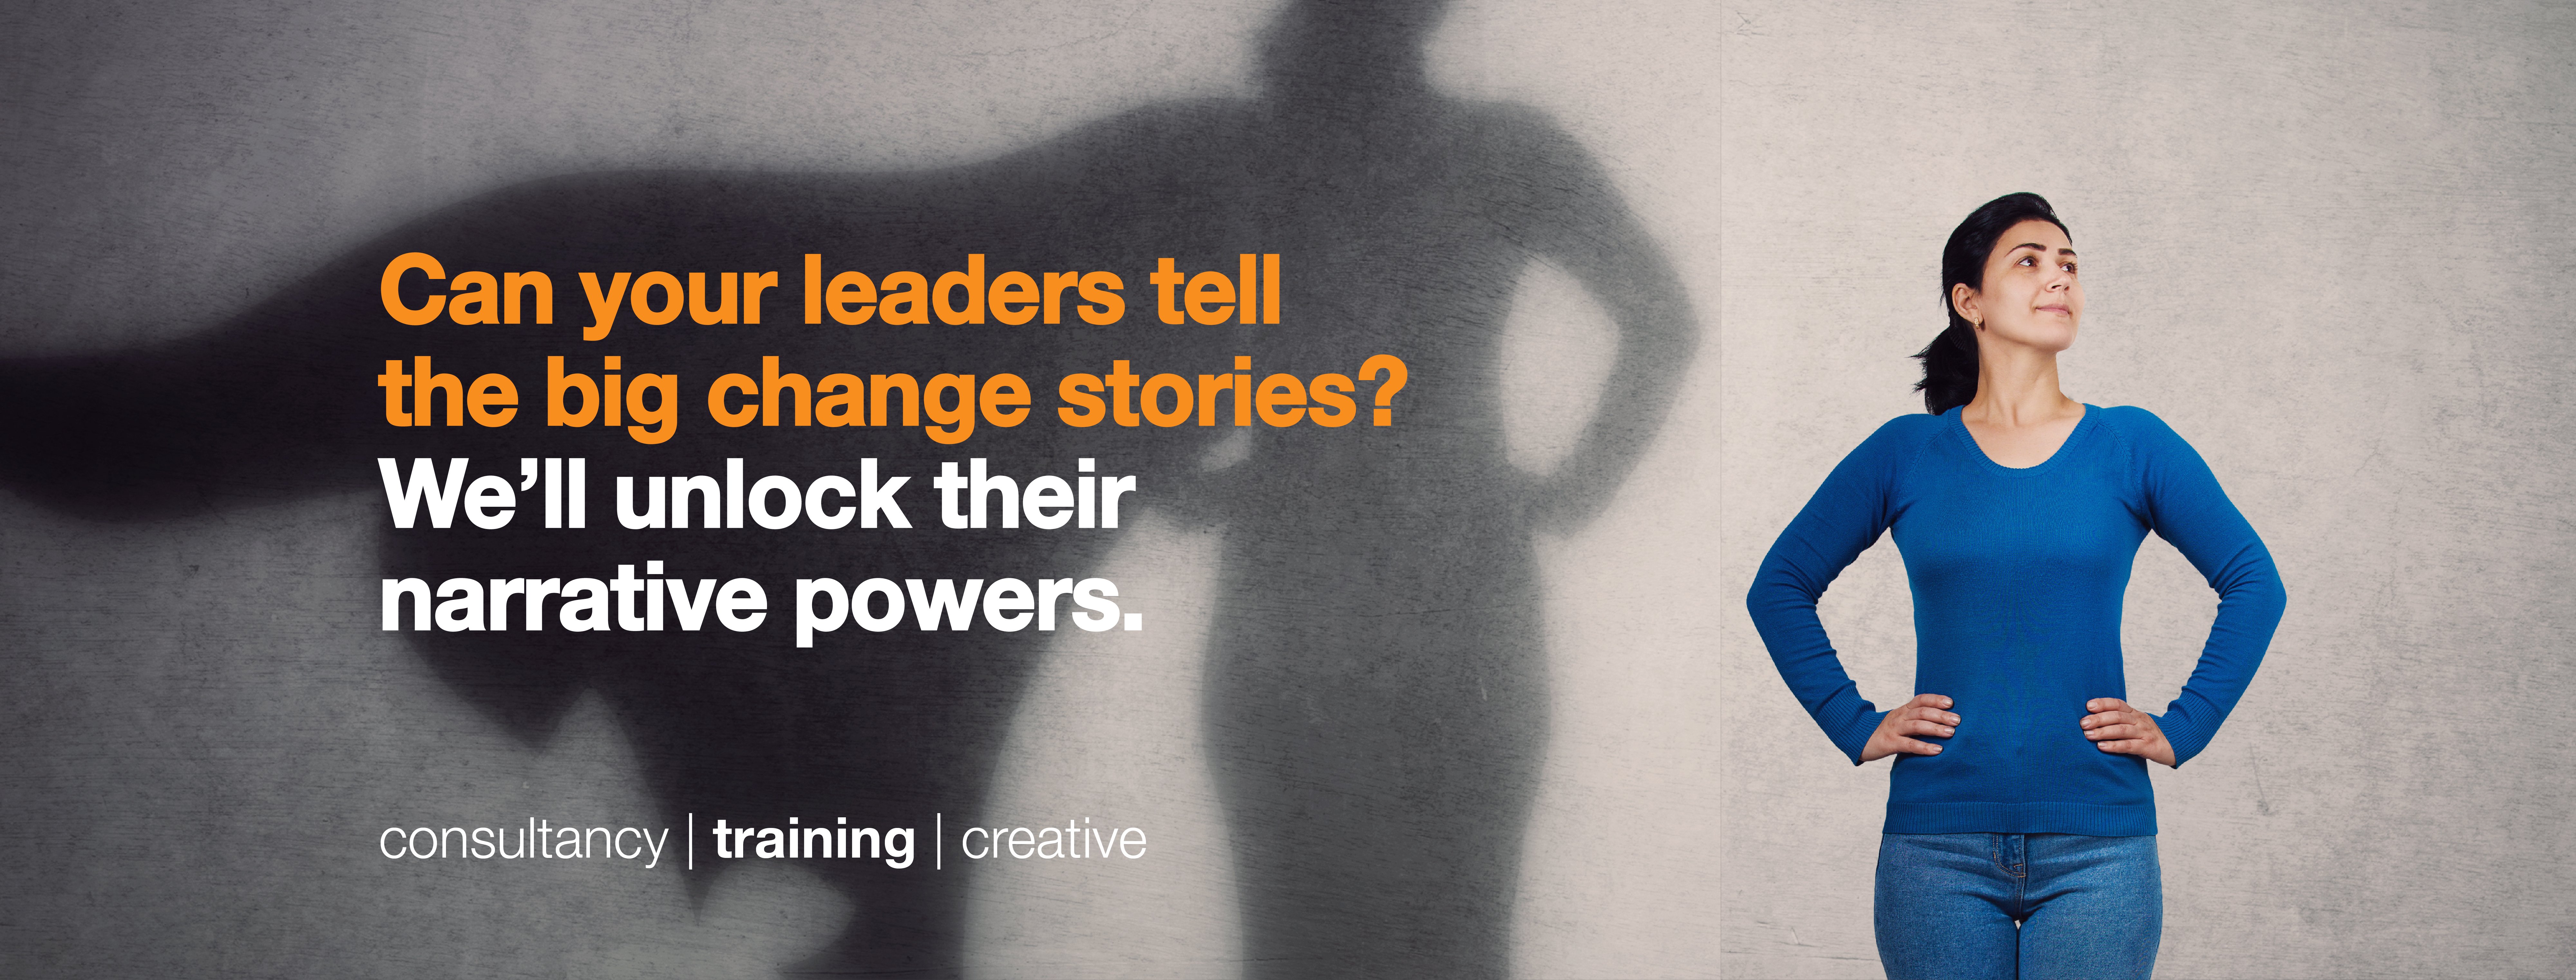 Can your leaders tell the big change stories? We'll unlock their narrative powers.